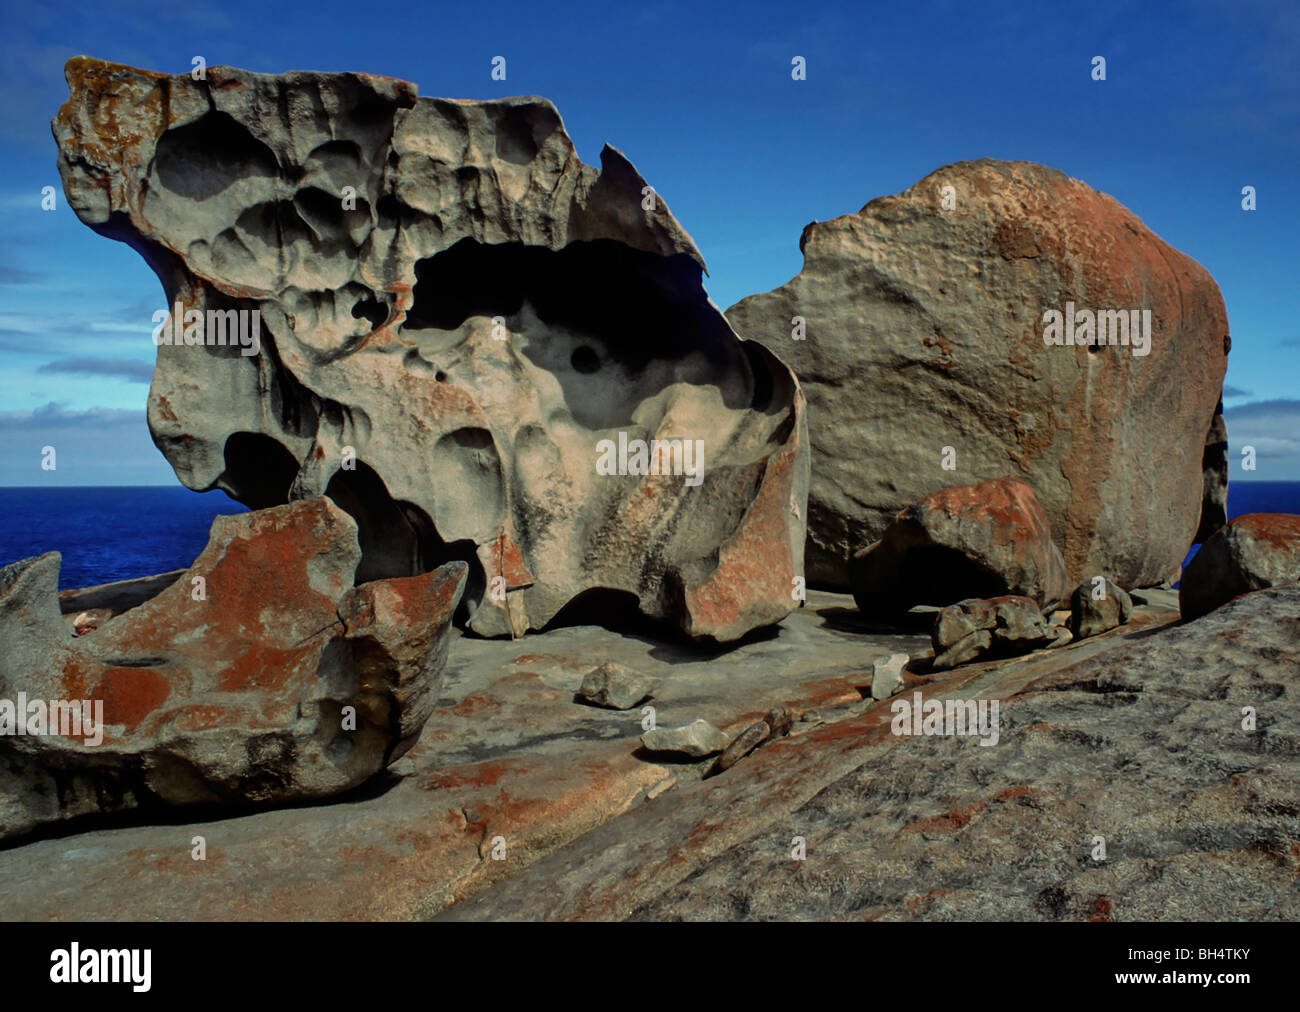 Remarkable rock formations on the beach at Kangaroo Island. Stock Photo